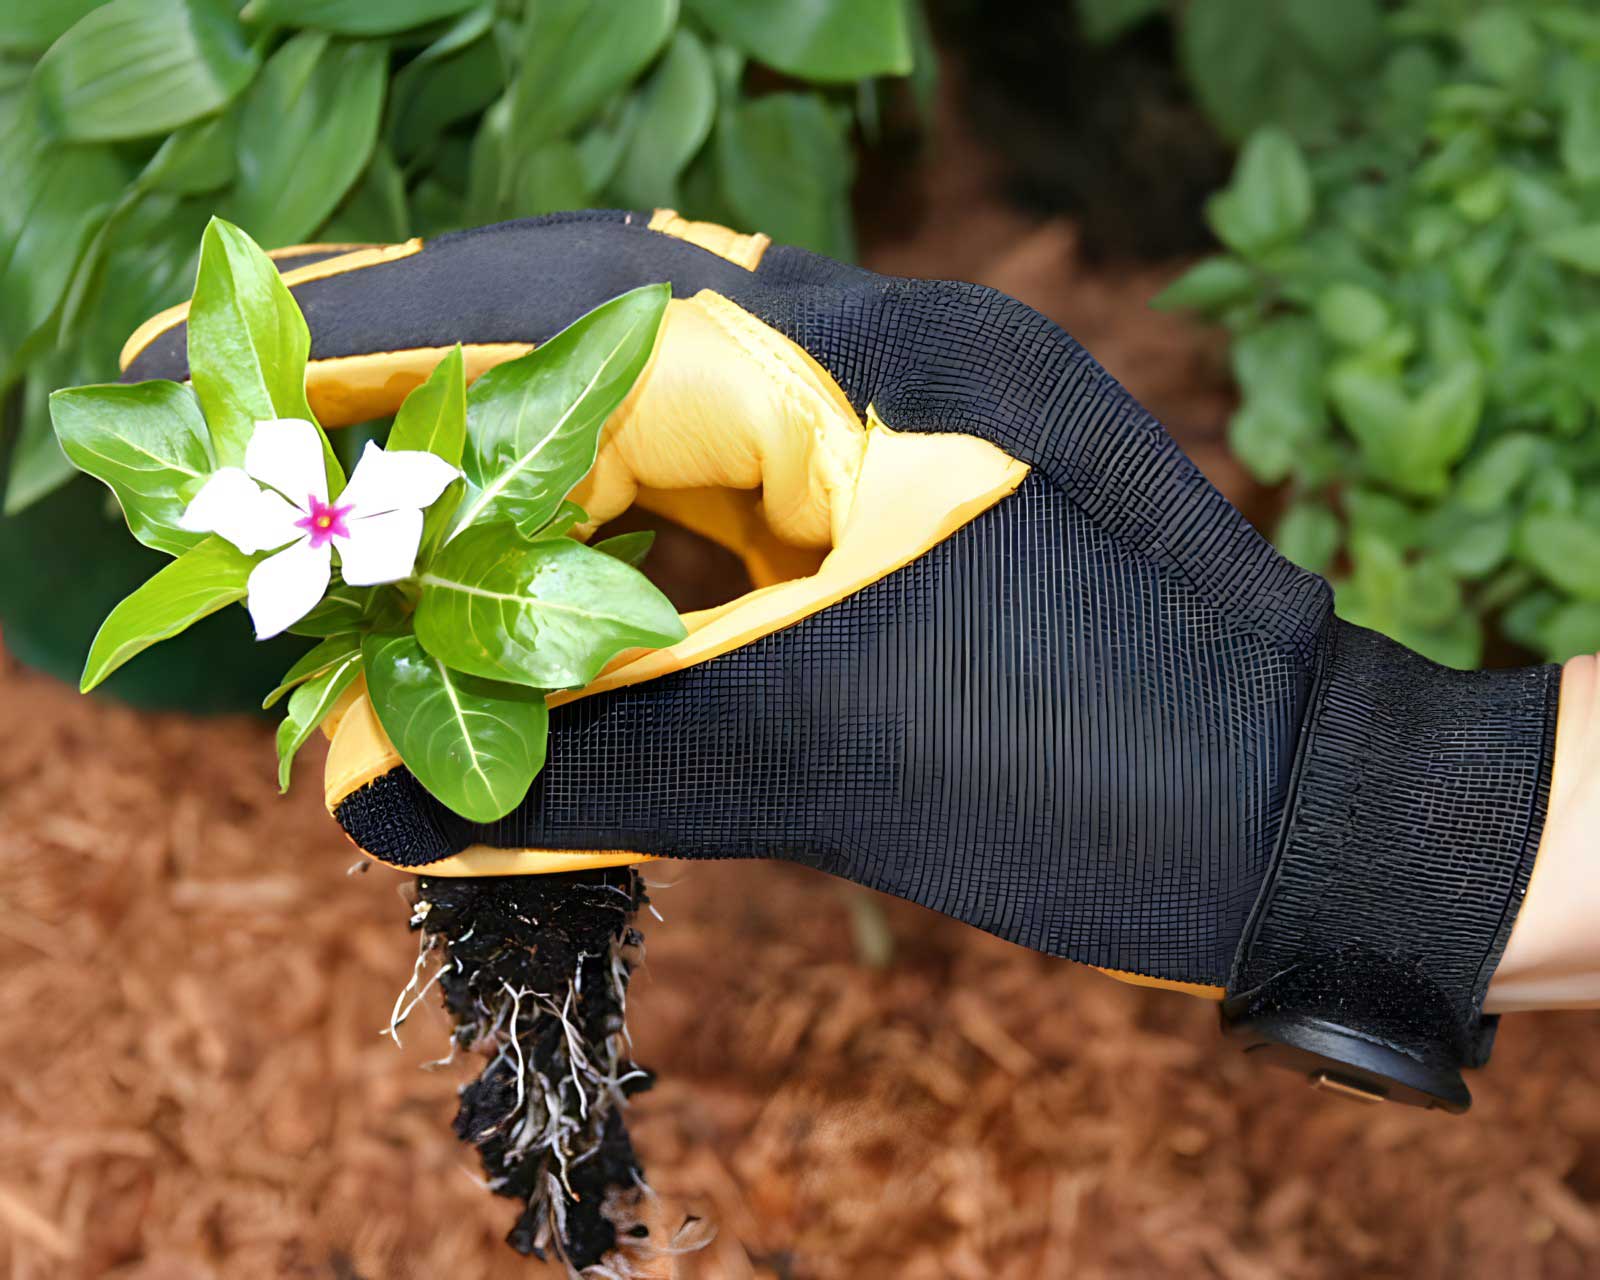 Soft Touch Garden Gloves by Gold Leaf of the UK